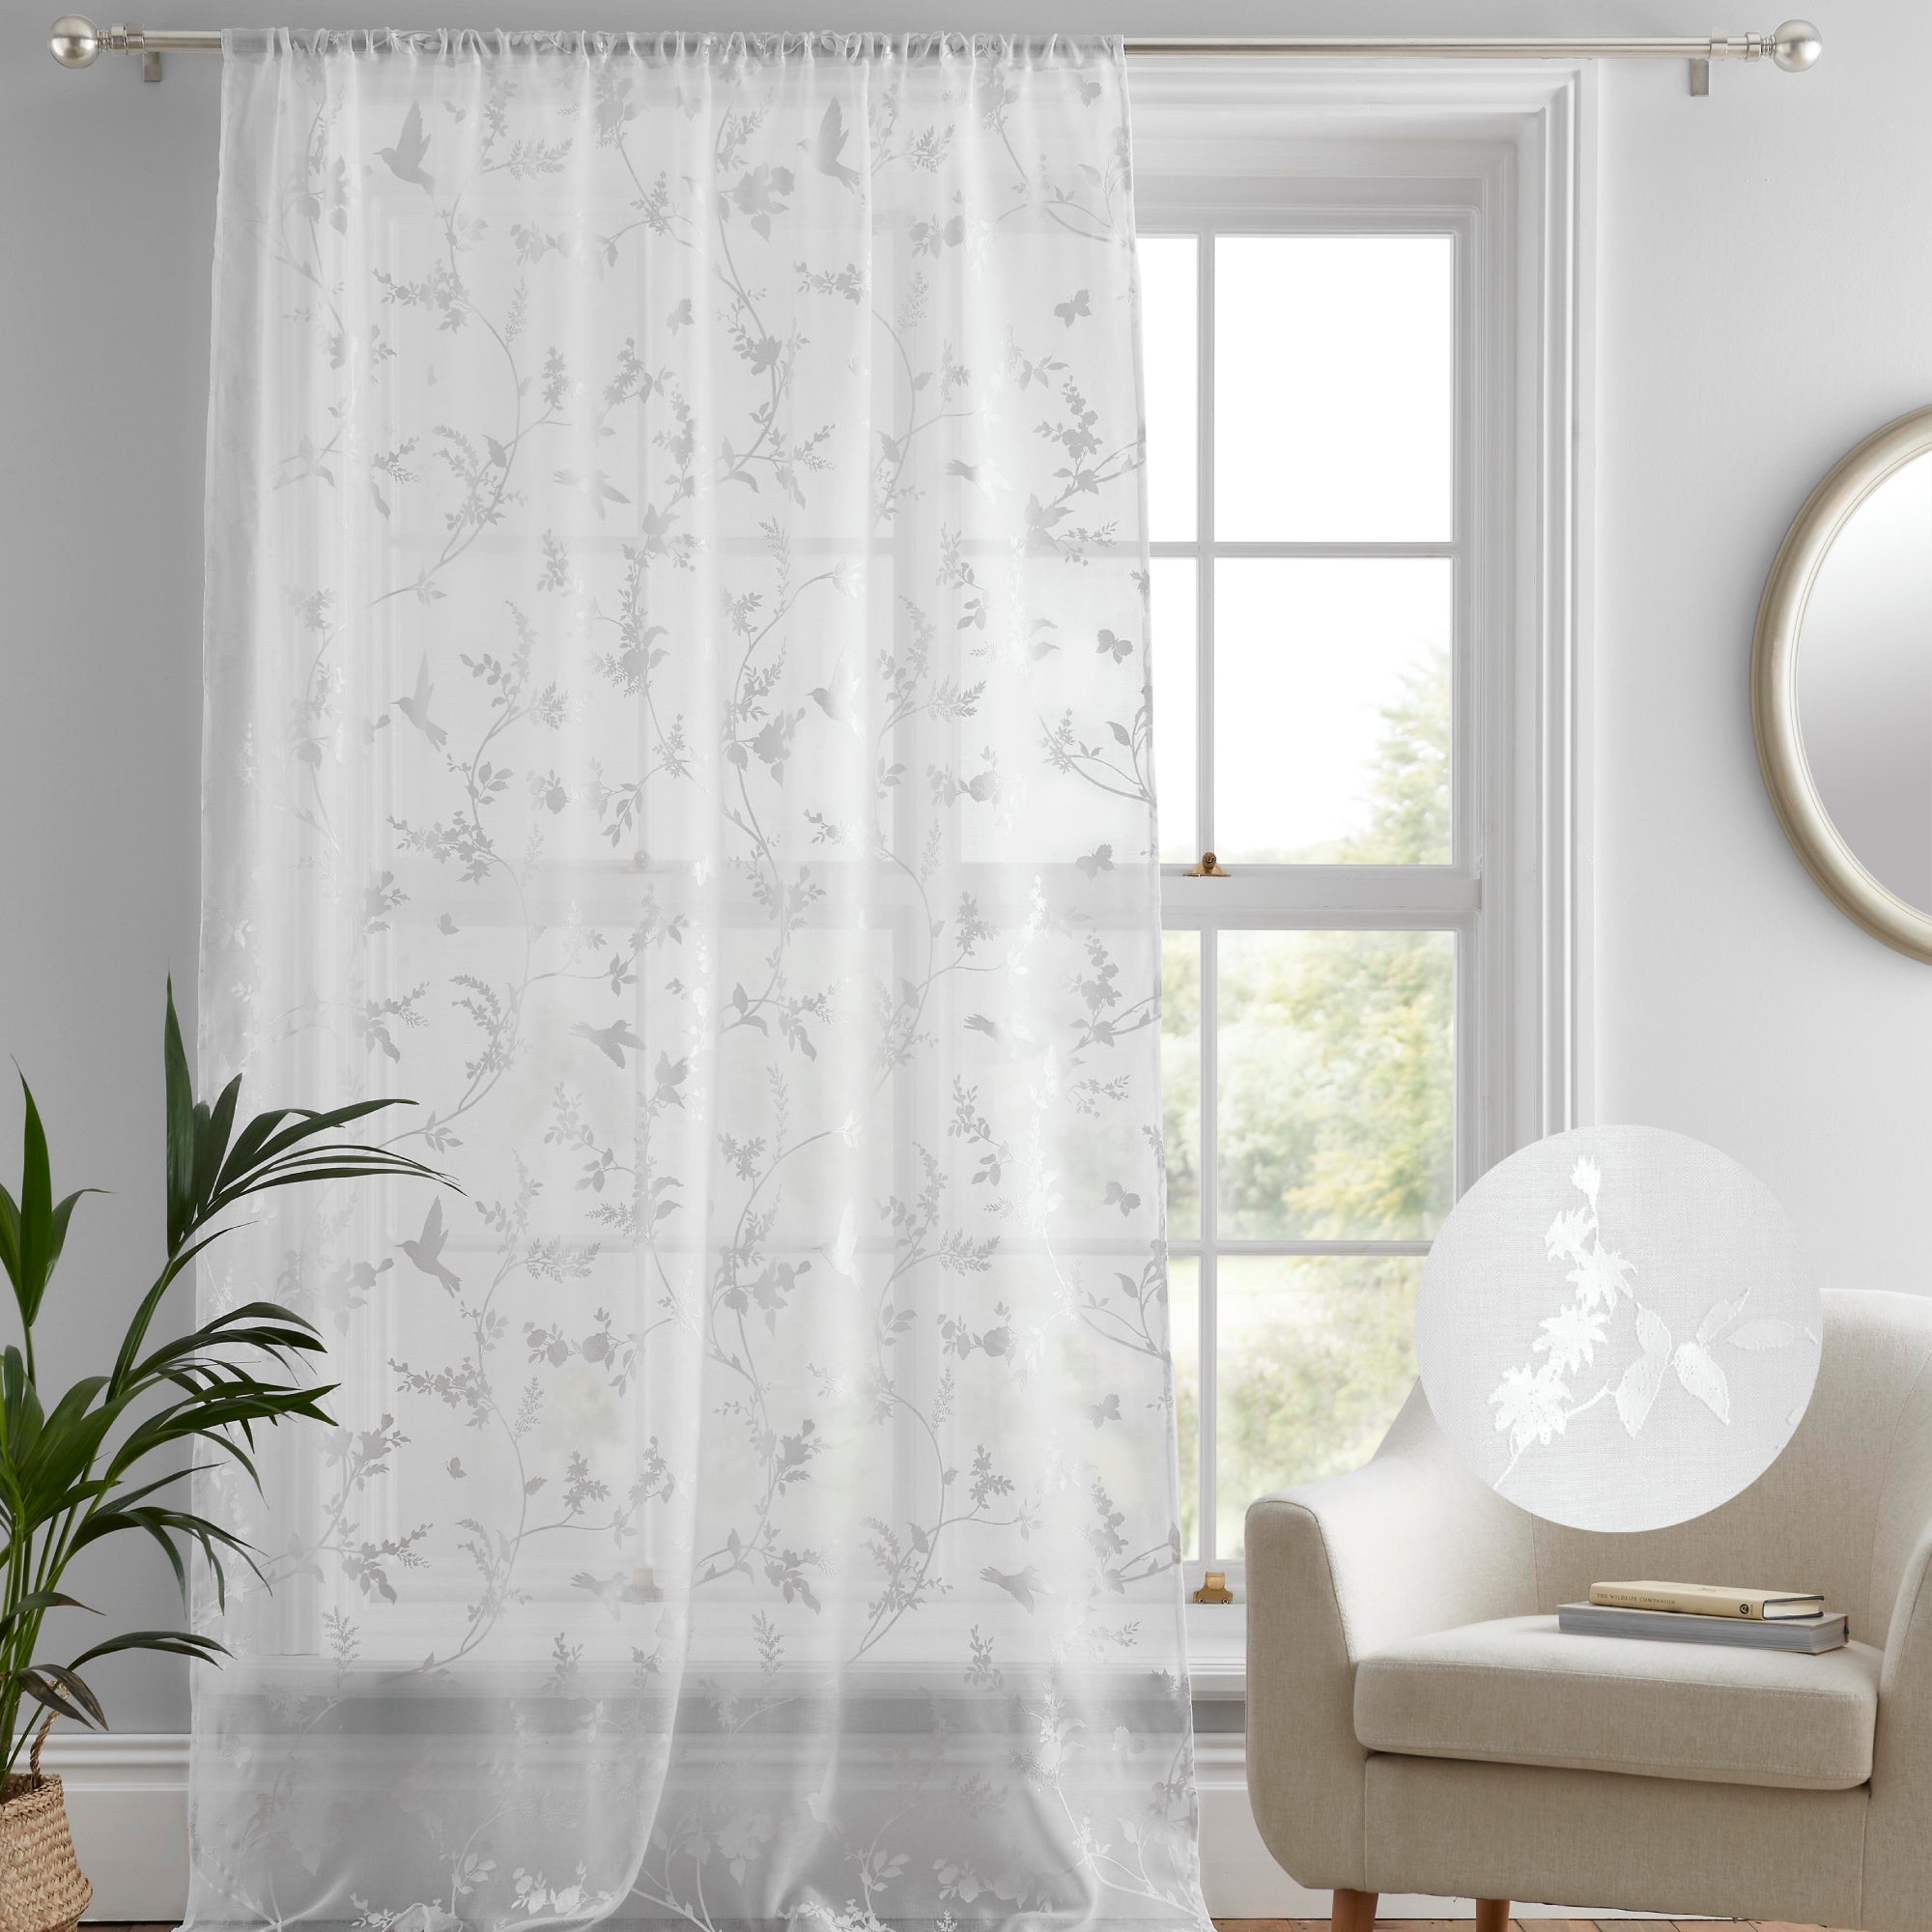 Voile Panel Darnley by Dreams & Drapes Curtains in White